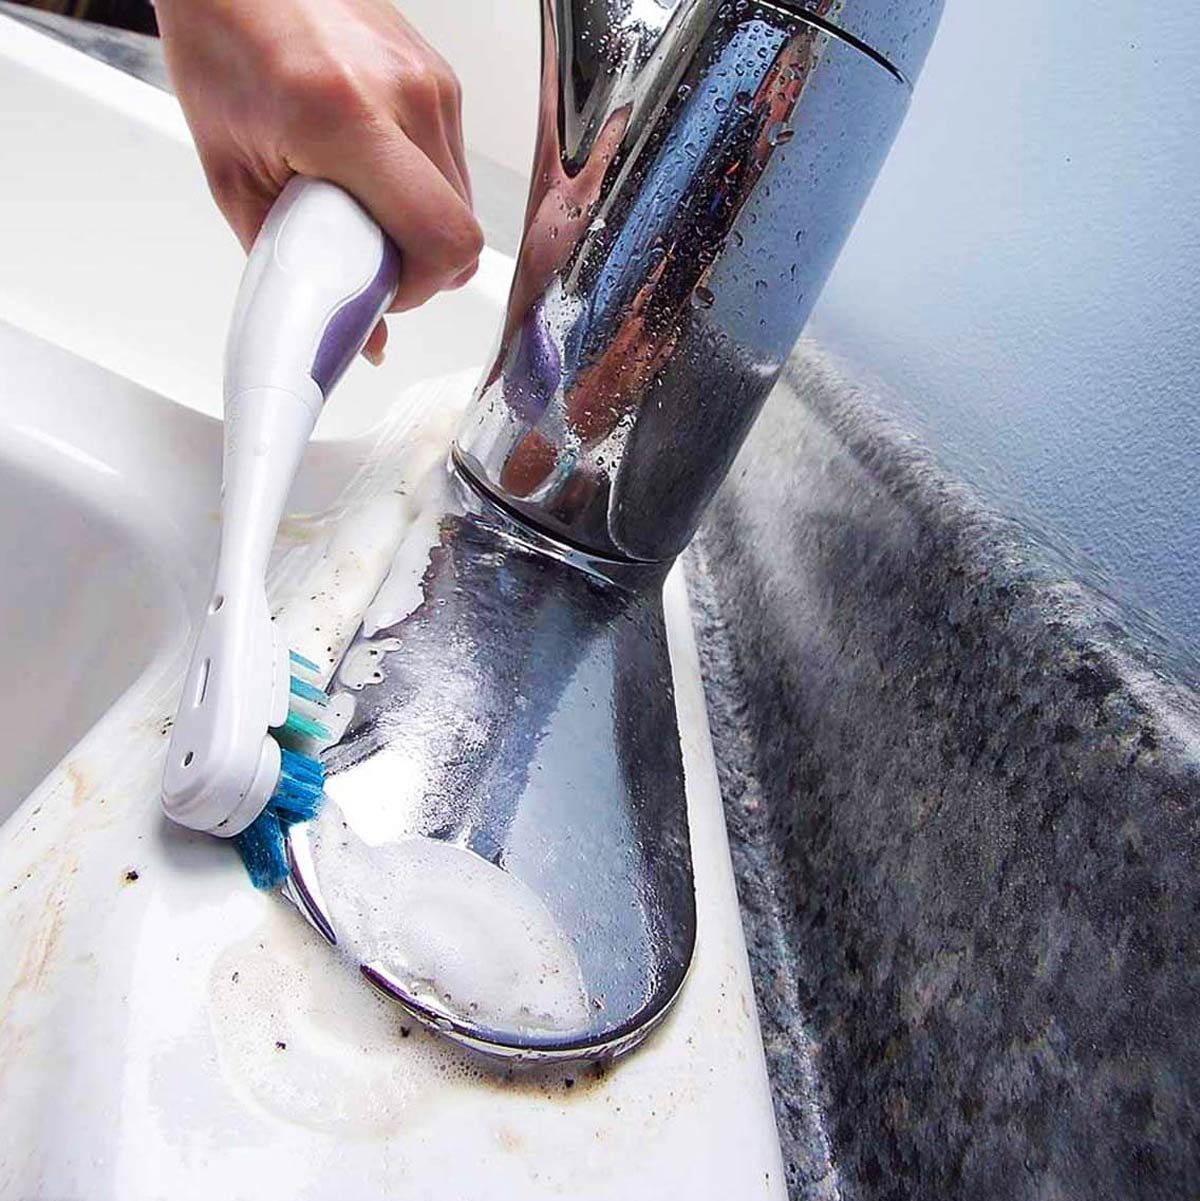 toothbrush cleaning dirty sink